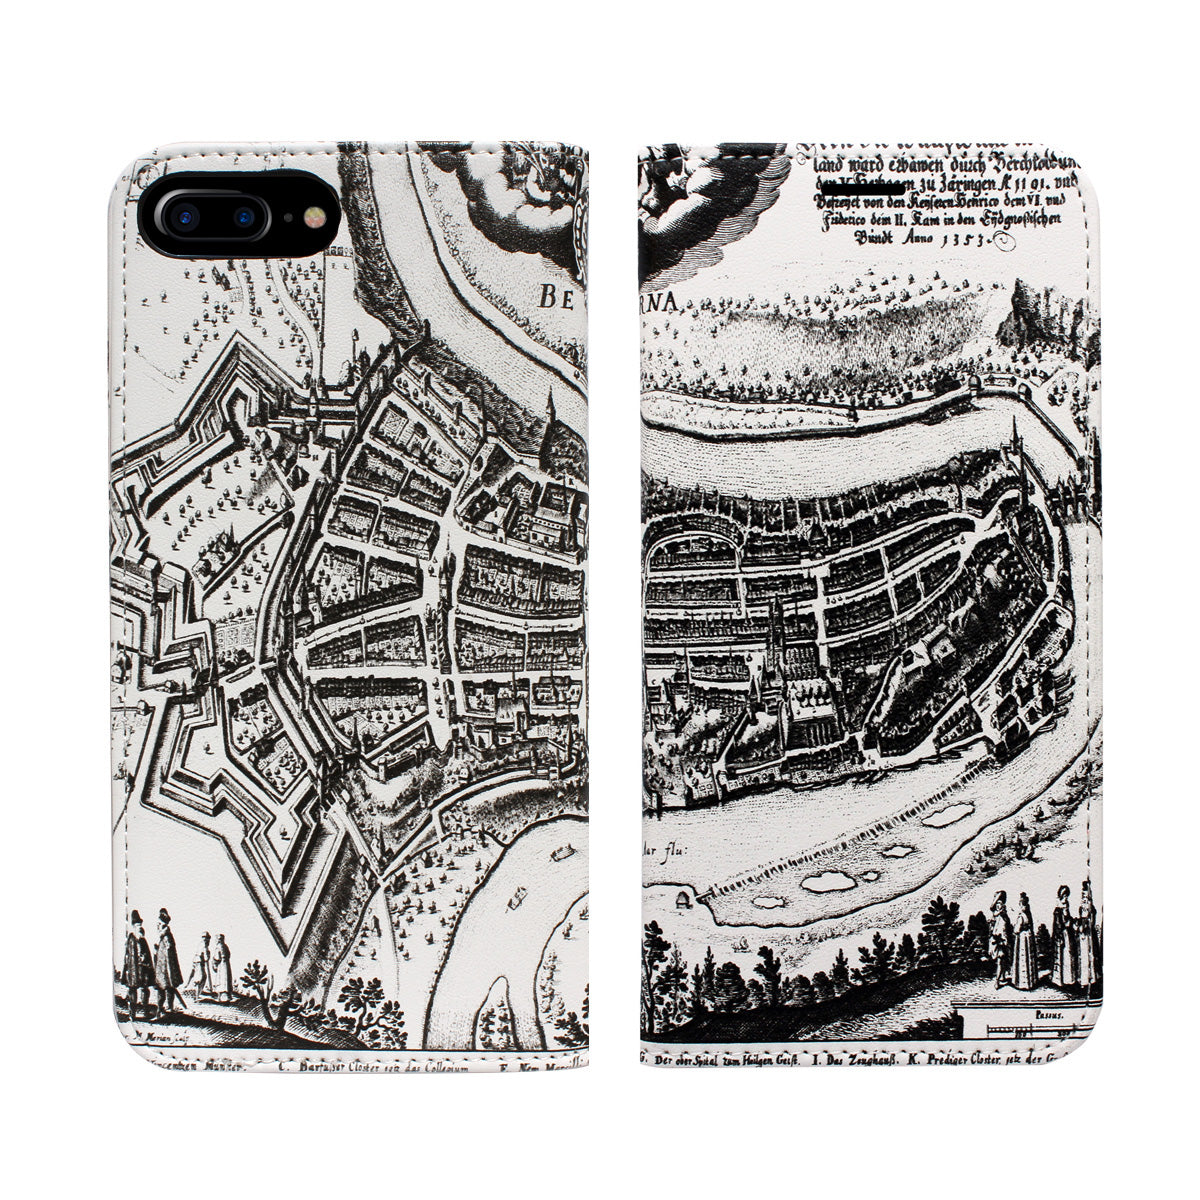 Bern Merian Panorama Case for iPhone and Samsung